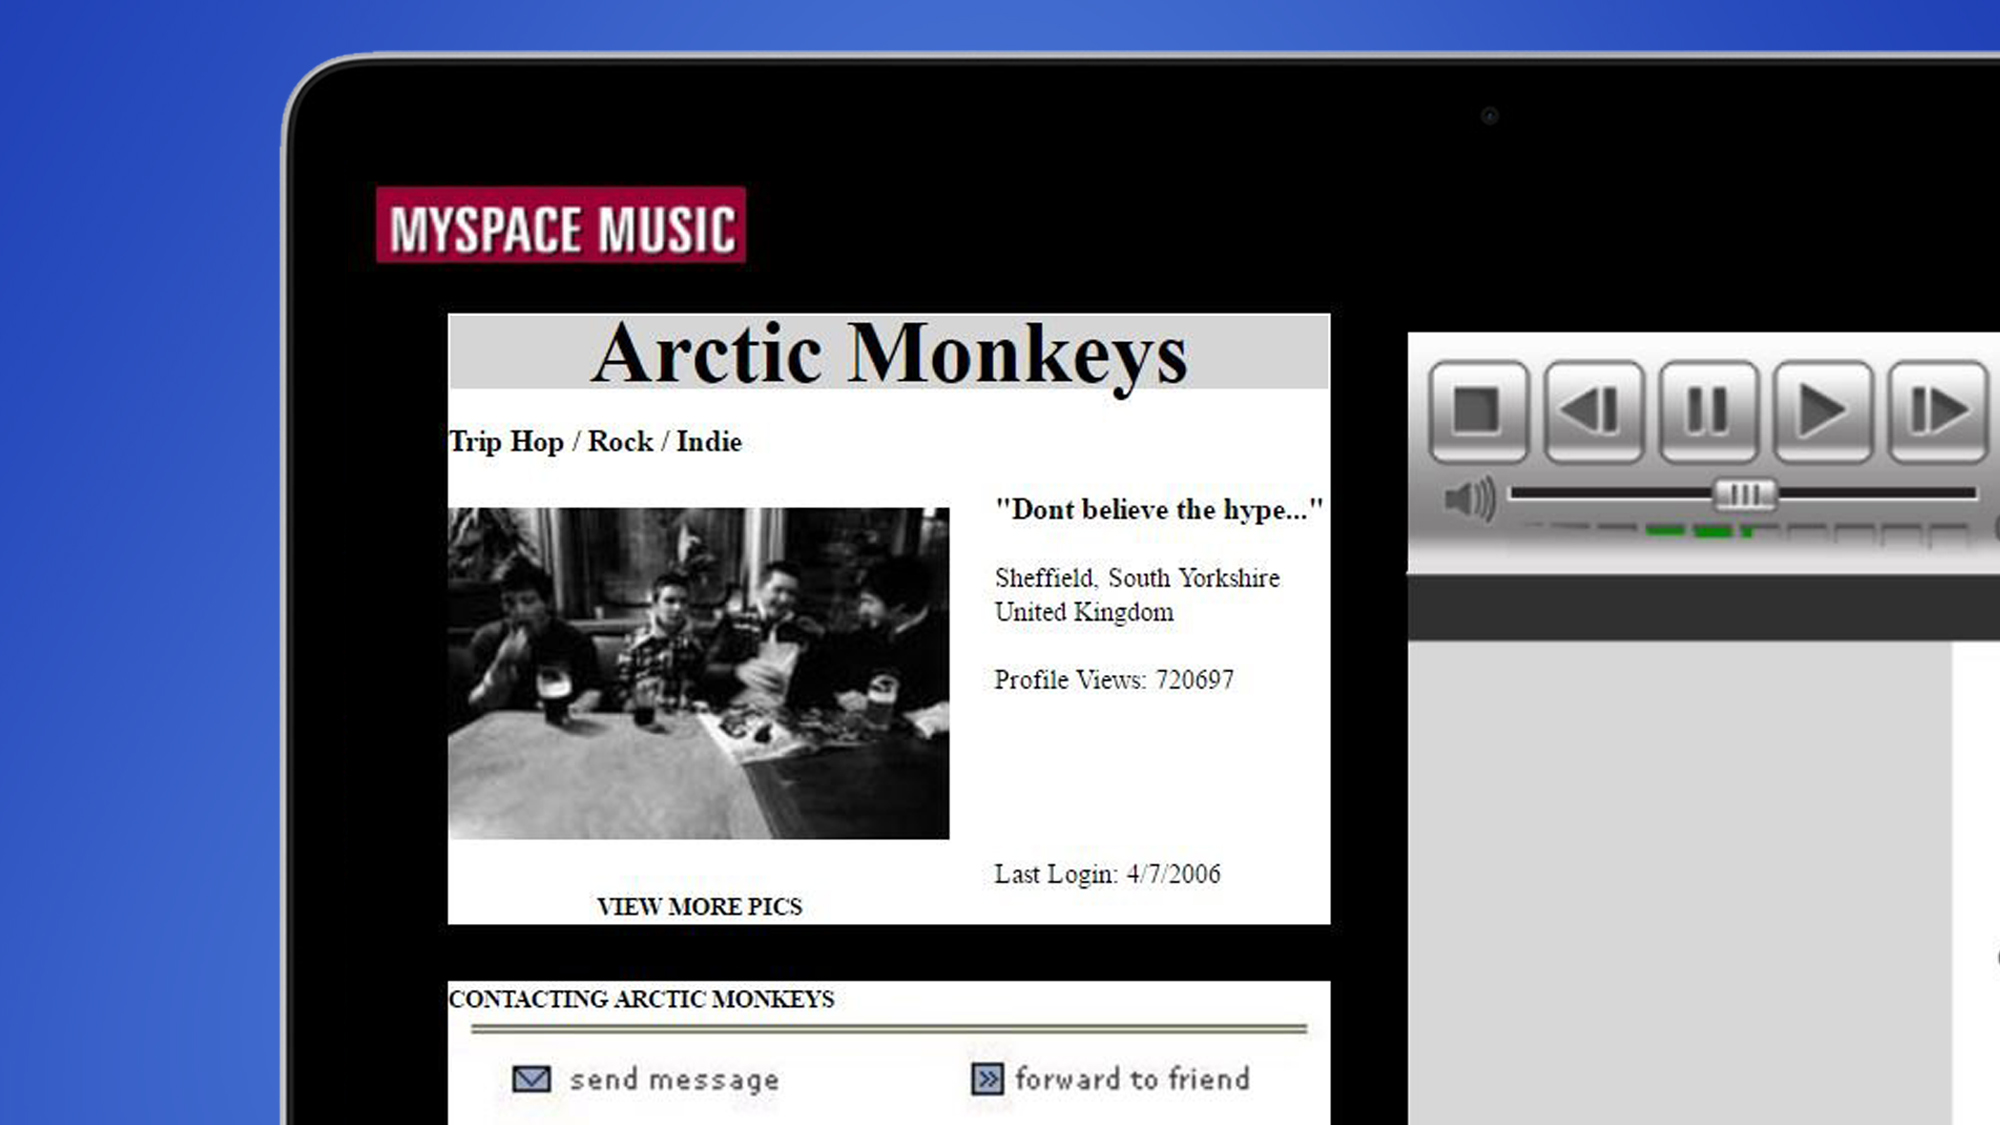 A laptop screen showing the MySpace page for Arctic Monkeys